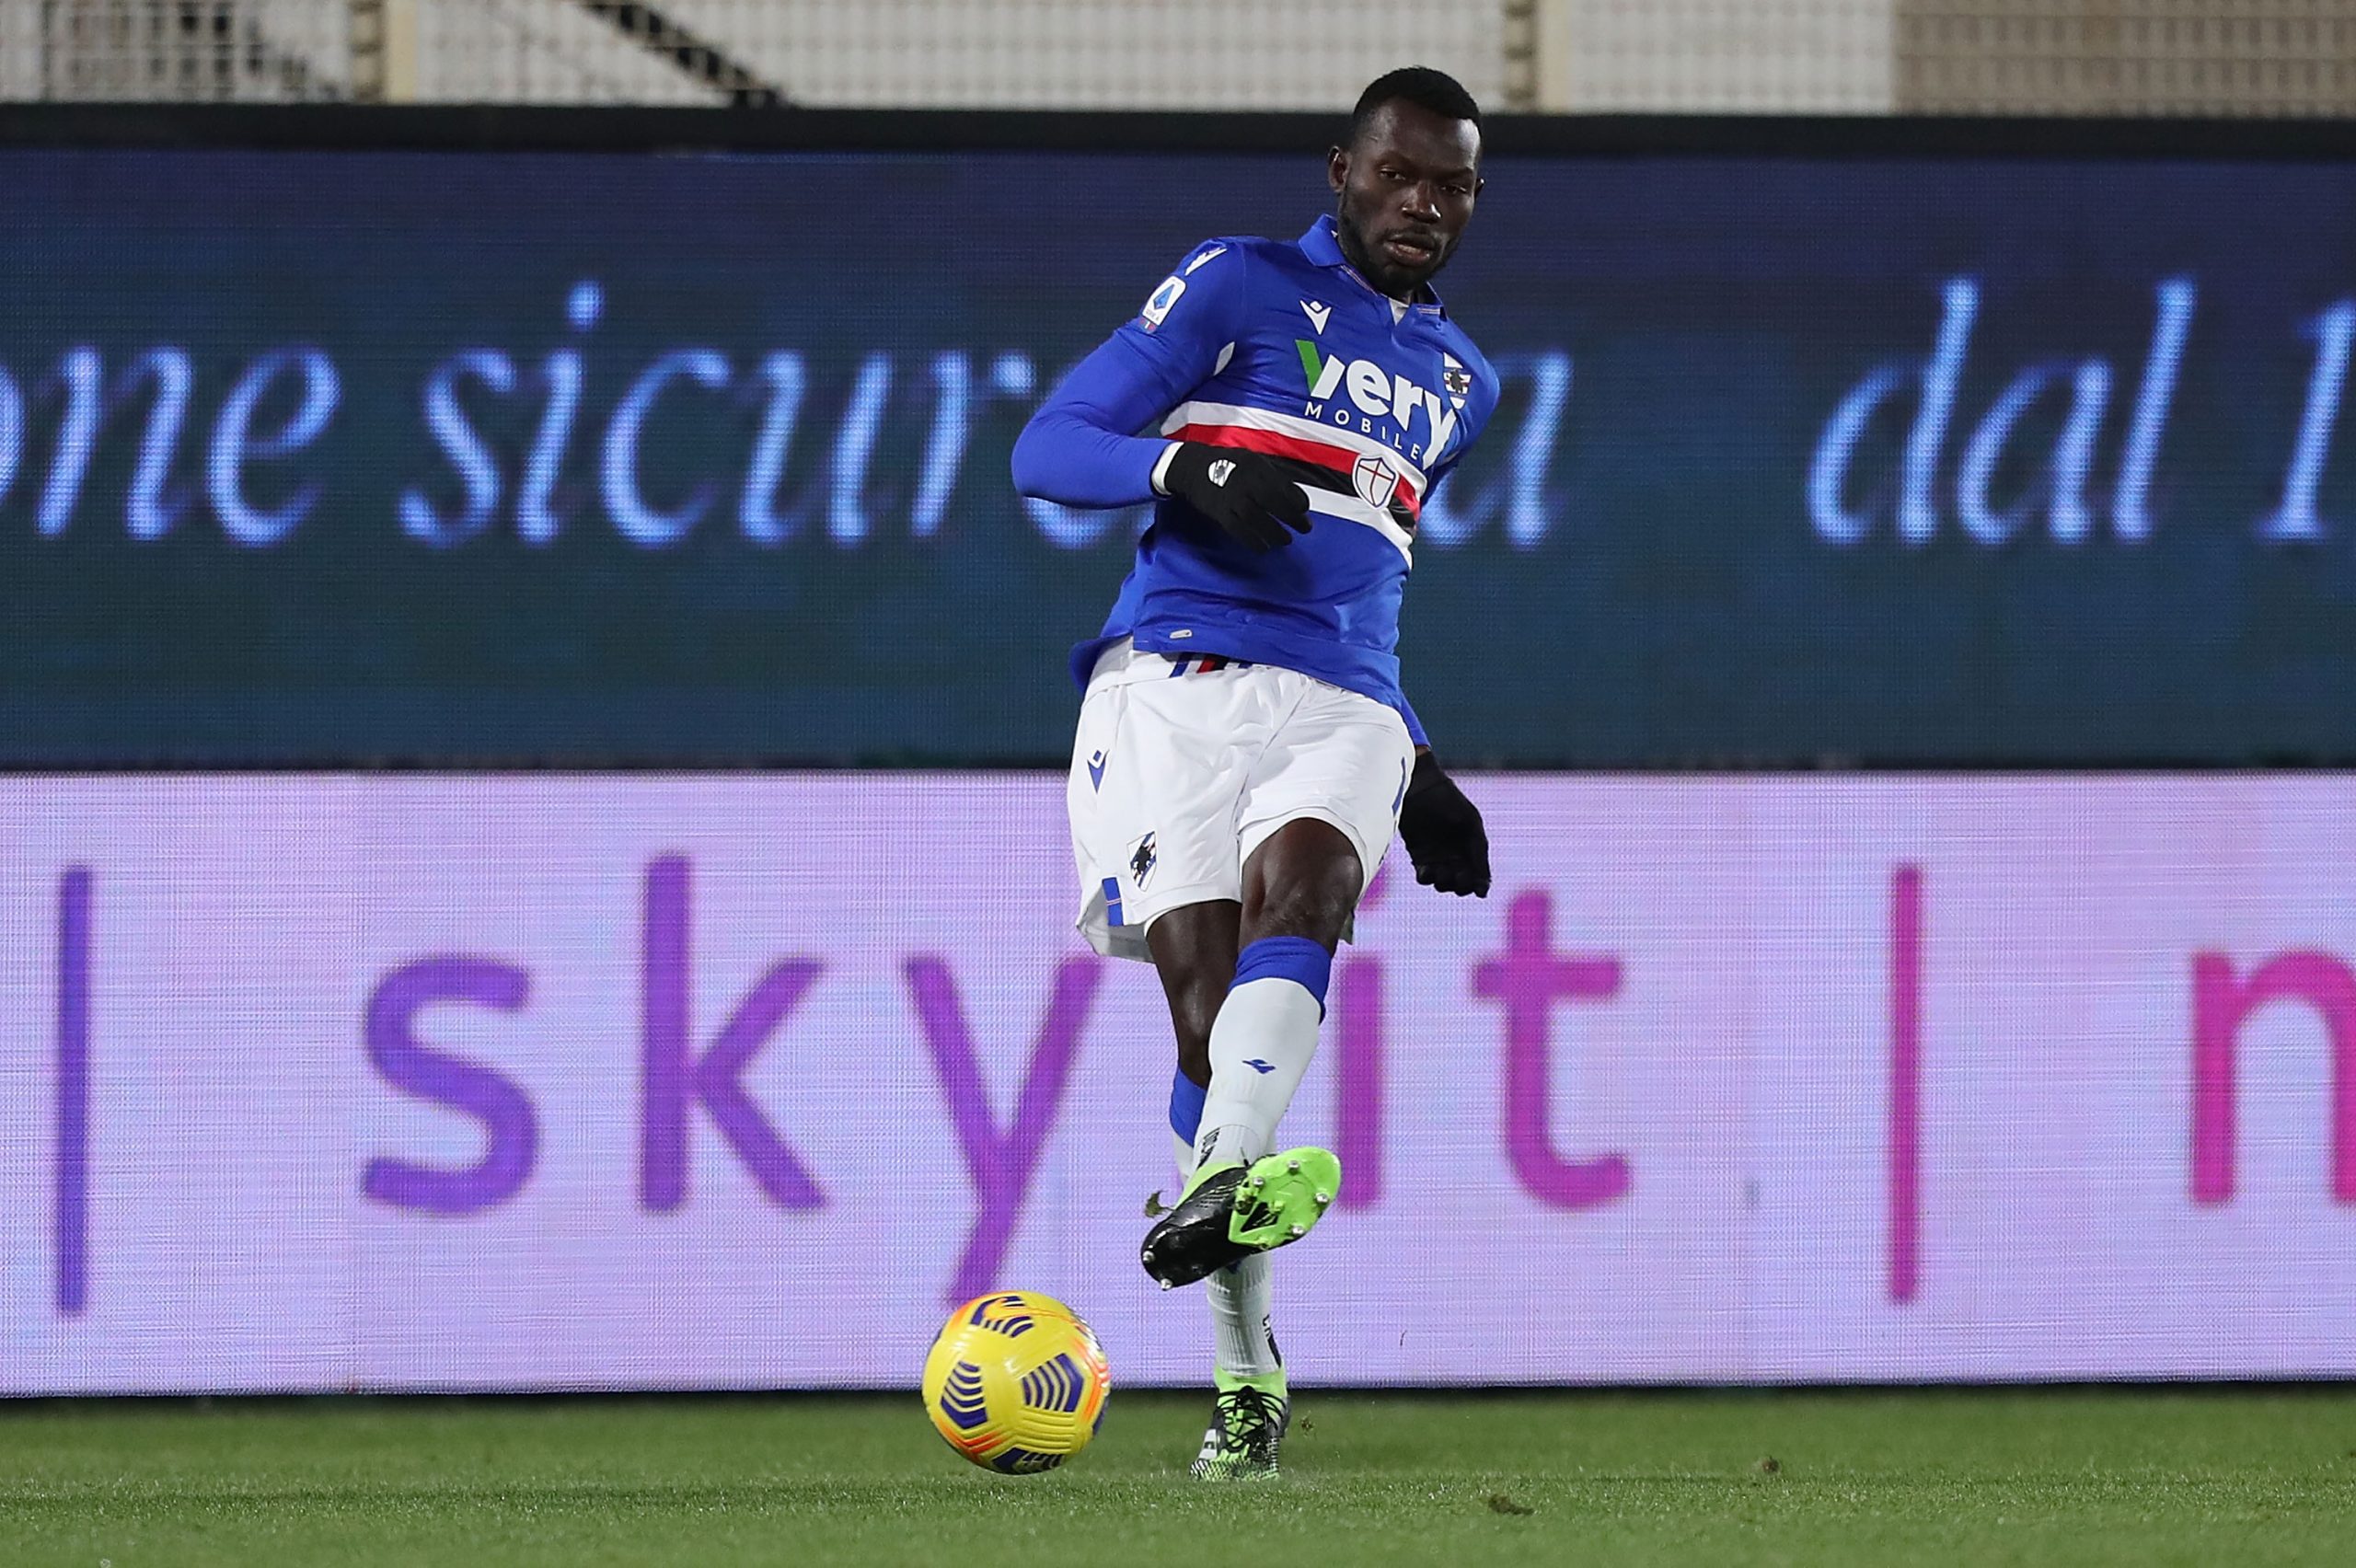 LA SPEZIA, ITALY - JANUARY 11: Omar Colley of UC Sampdoria in action during the Serie A match between Spezia Calcio and UC Sampdoria at Stadio Alberto Picco on January 11, 2021 in La Spezia, Italy.  (Photo by Gabriele Maltinti/Getty Images)